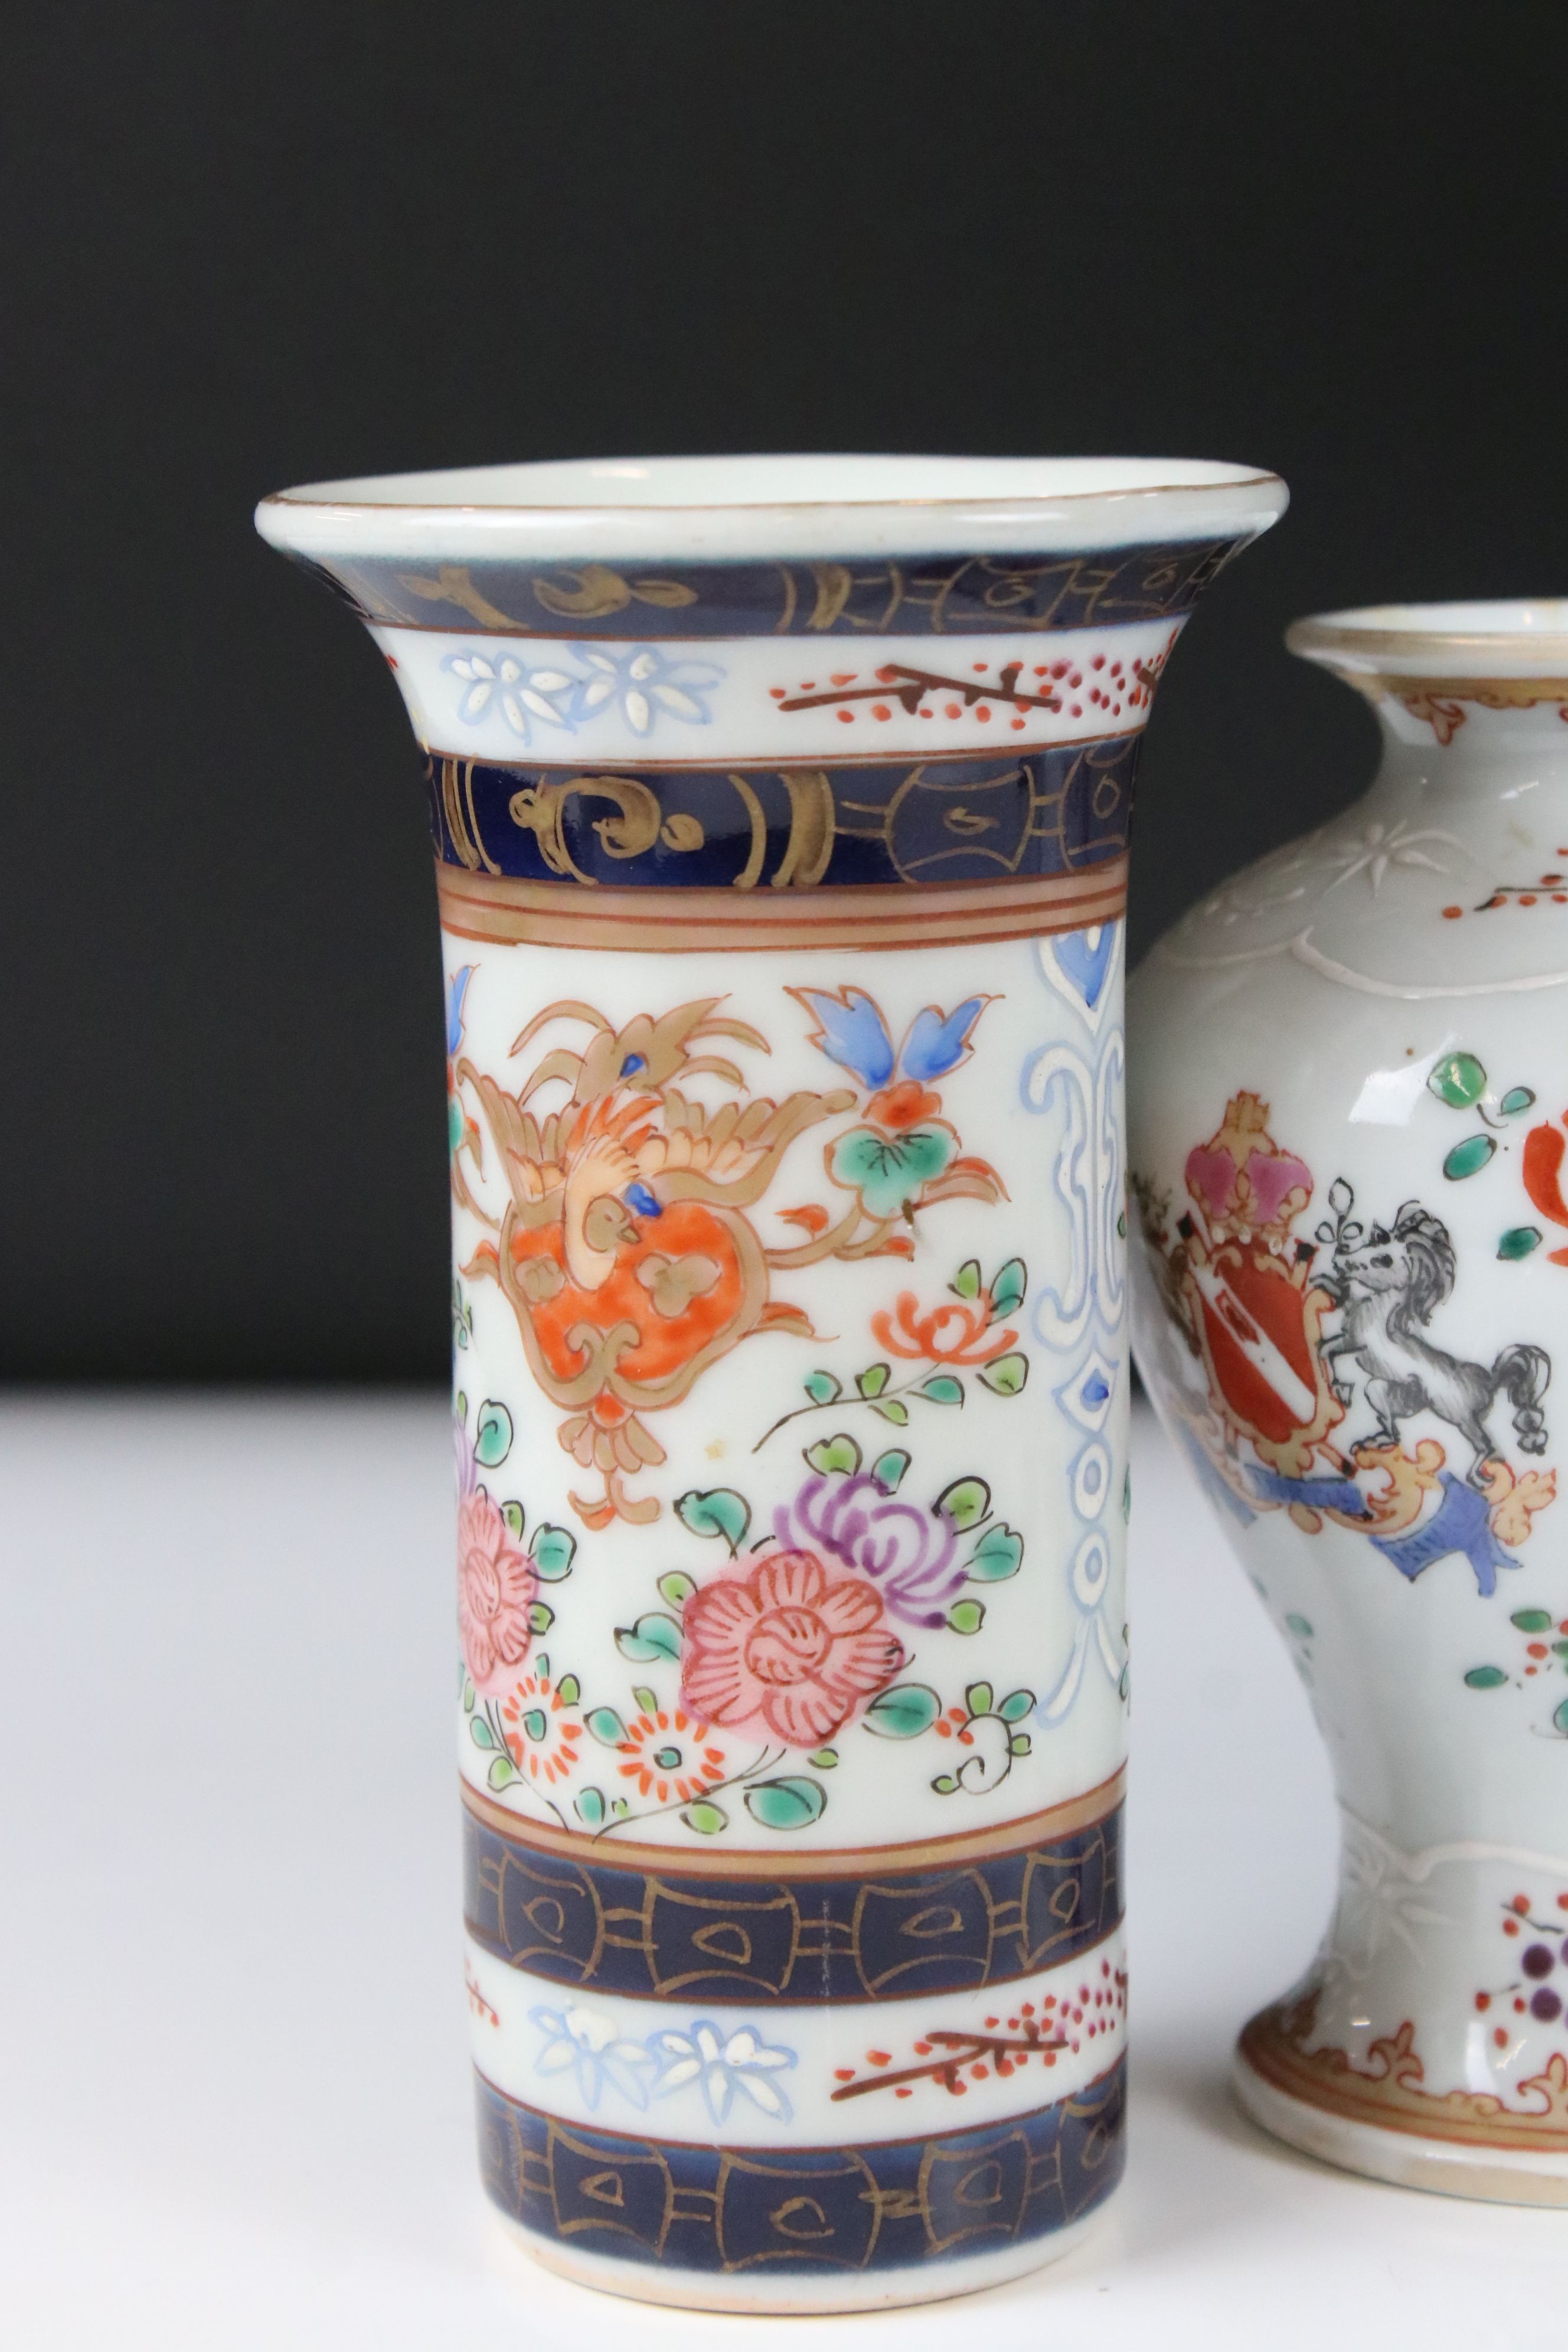 Pair of 19th century Samson type Porcelain Armorial Baluster Vases decorated in the Chinese manner - Image 4 of 12